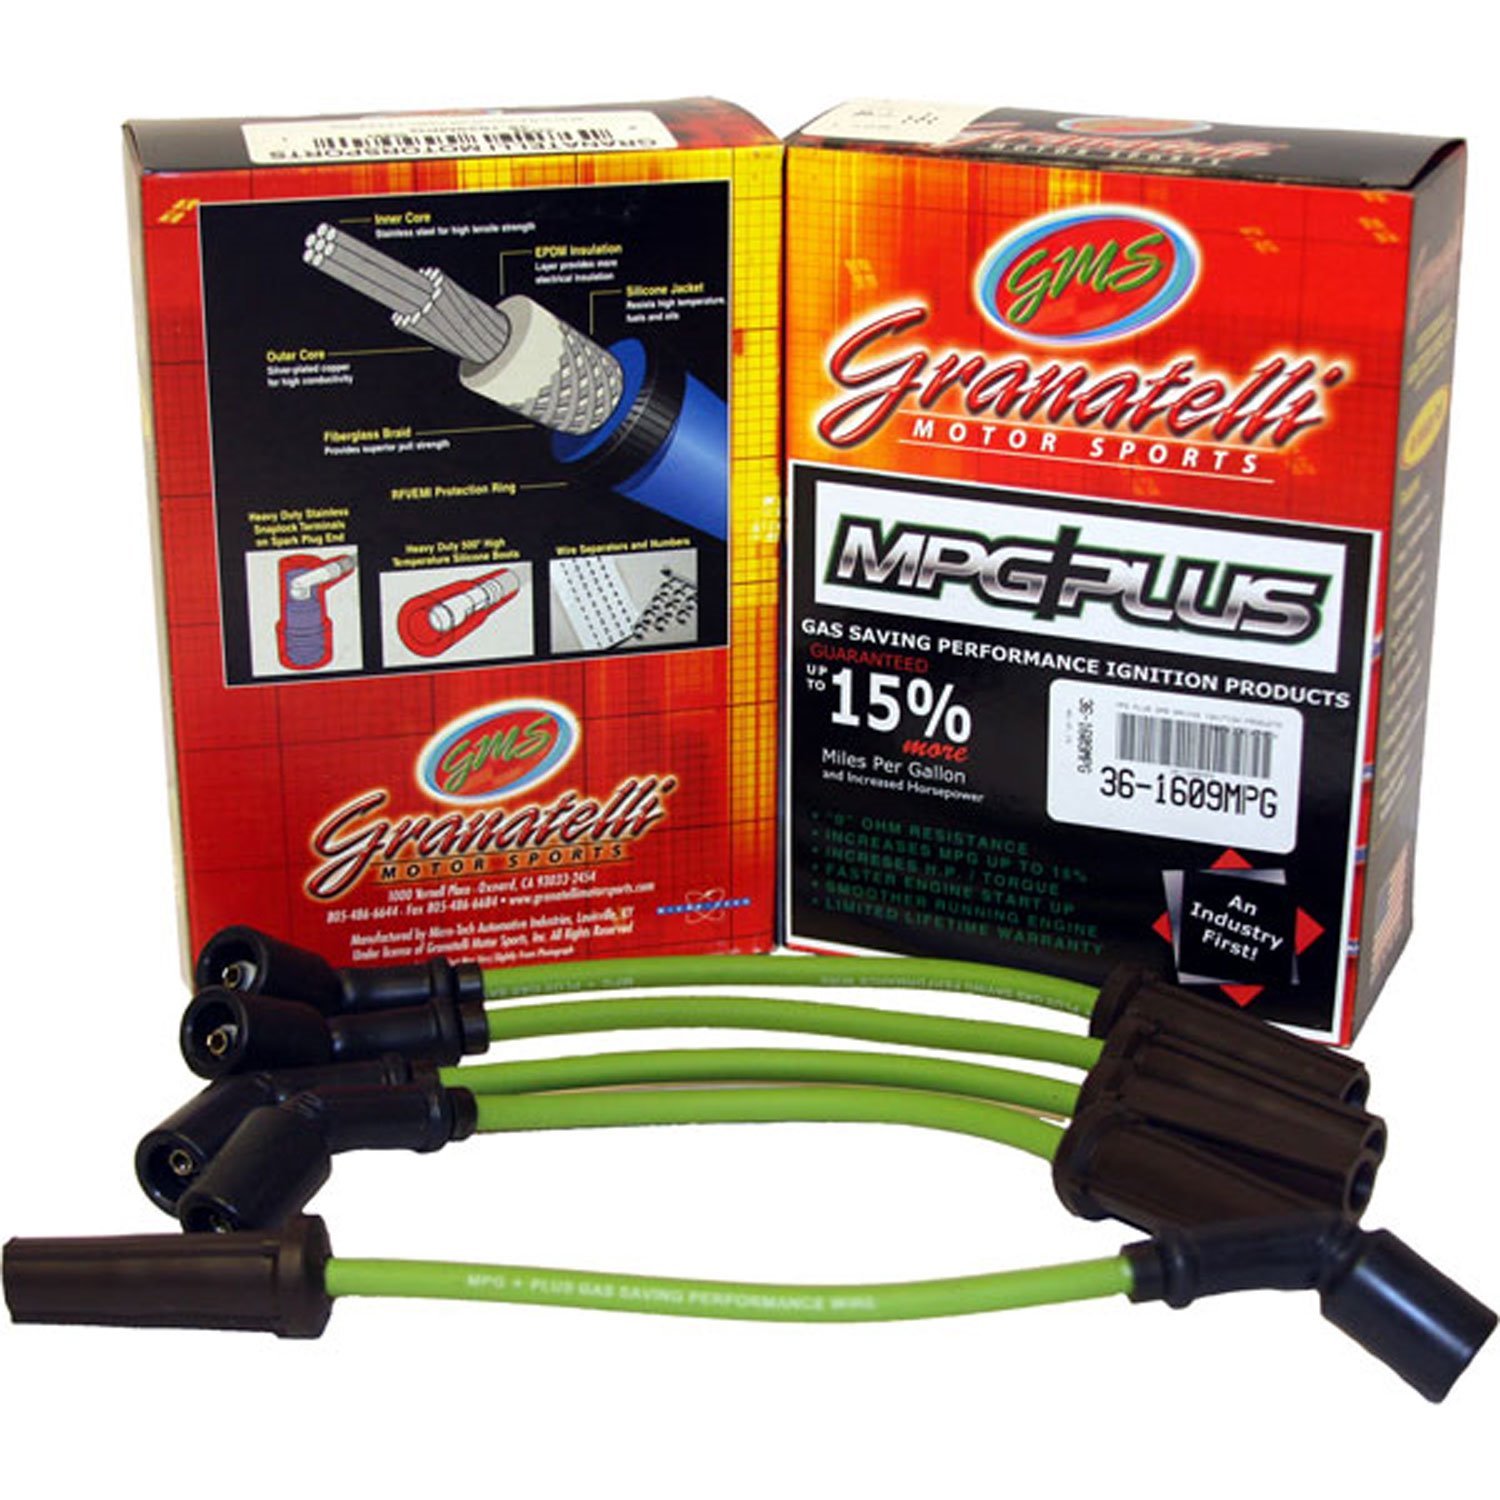 MPG Wires MAZDA RX SERIES 2CYL 1.1L 80-85